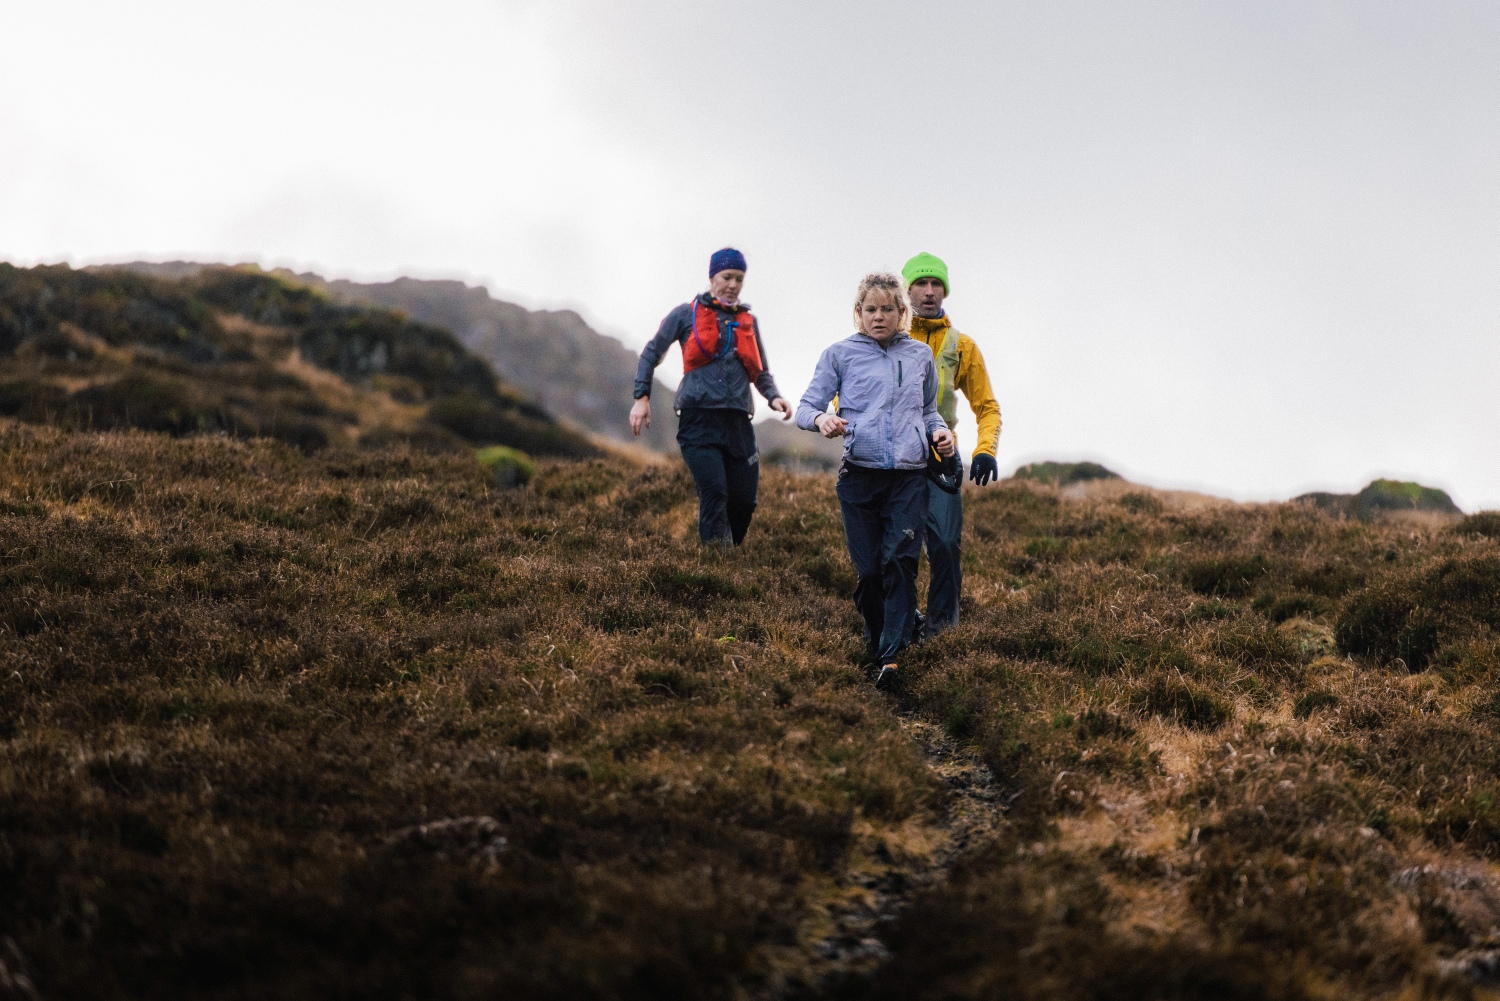 Group running down hill with waterproof gear on - Lake District